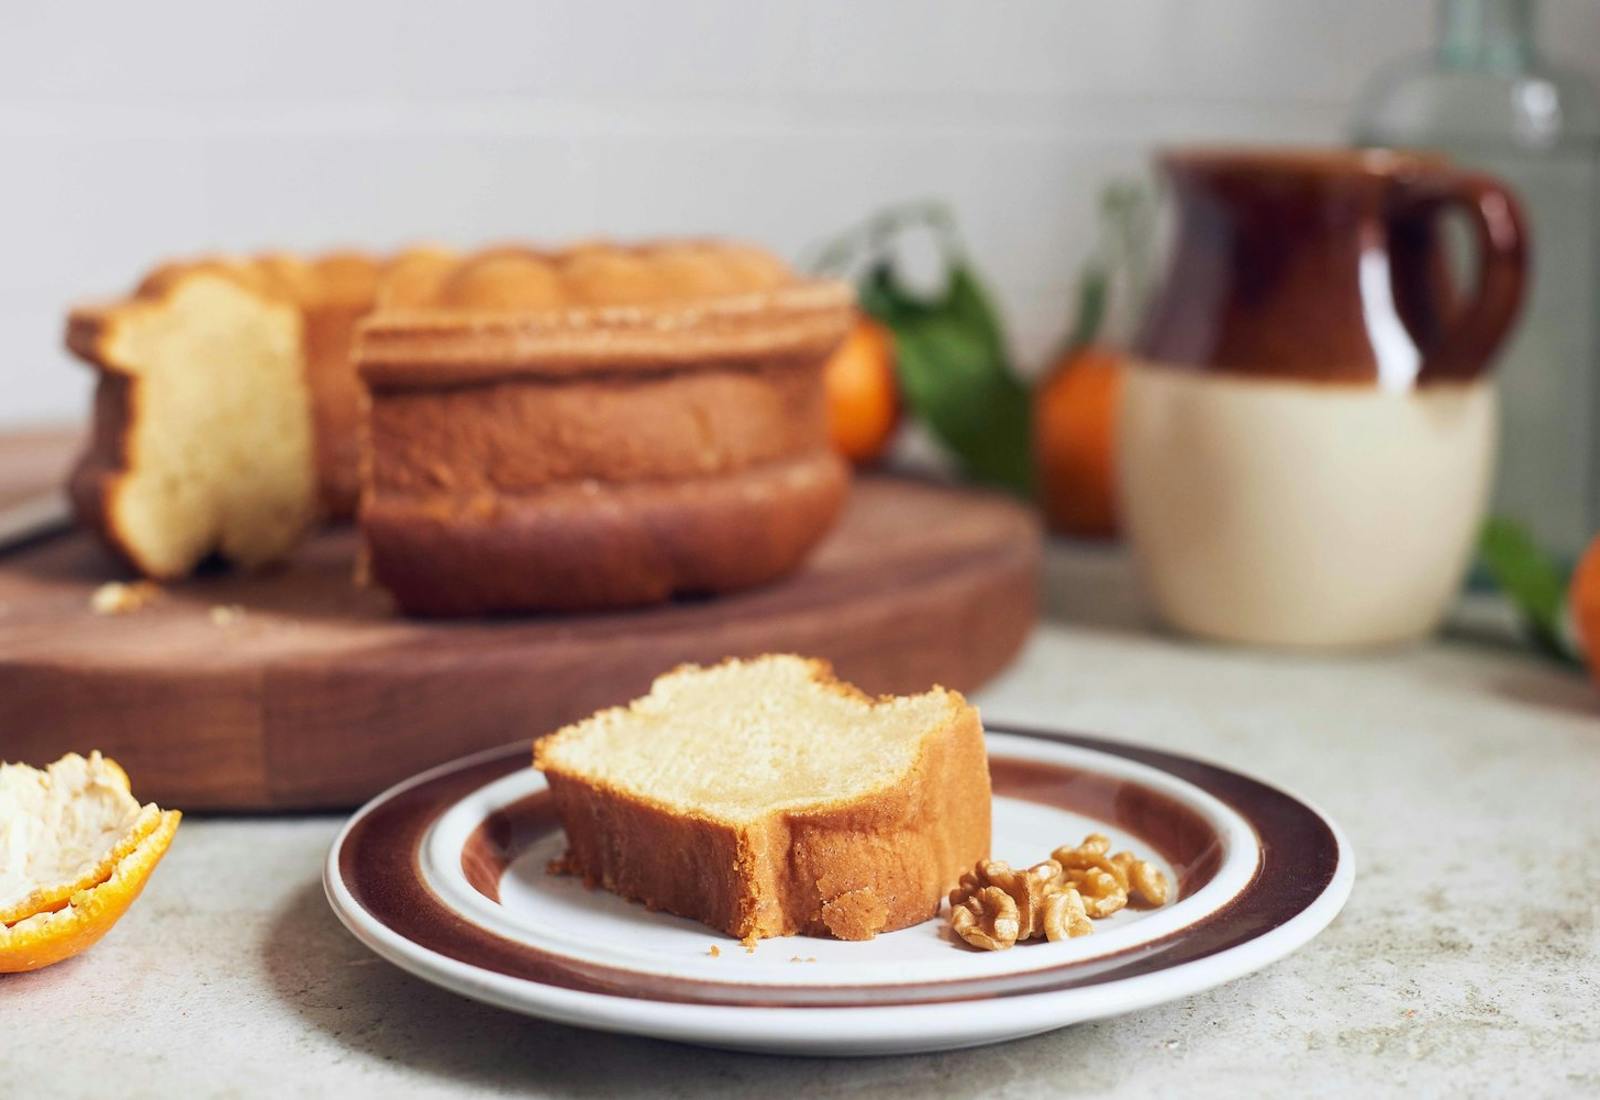 Slice of honey cake on dish with walnuts with entire cake on wooden cutting board, oranges and ceramic jug.